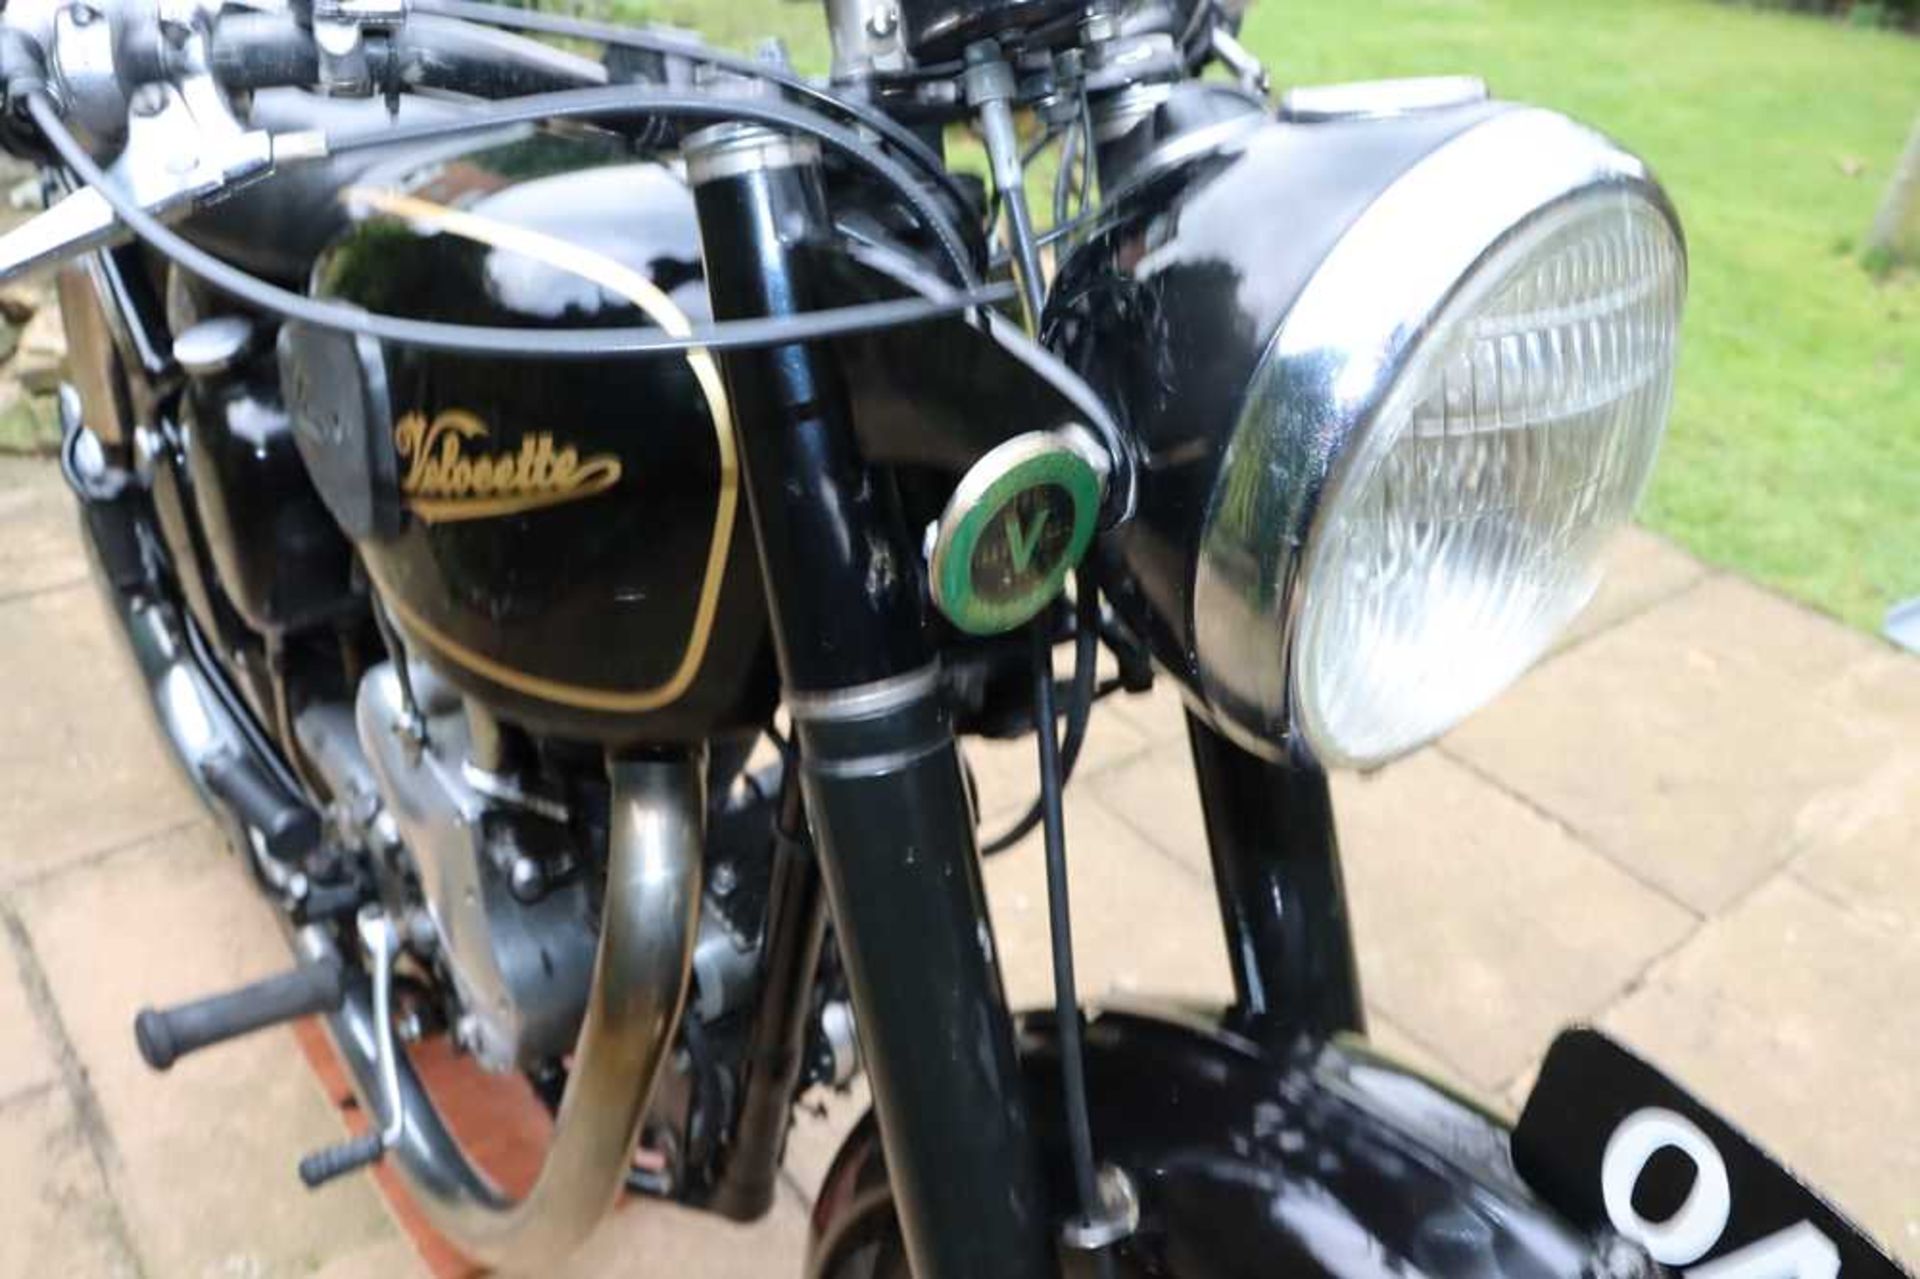 1954 Velocette MSS Fitted with an Alton electric starter kit - Image 10 of 41